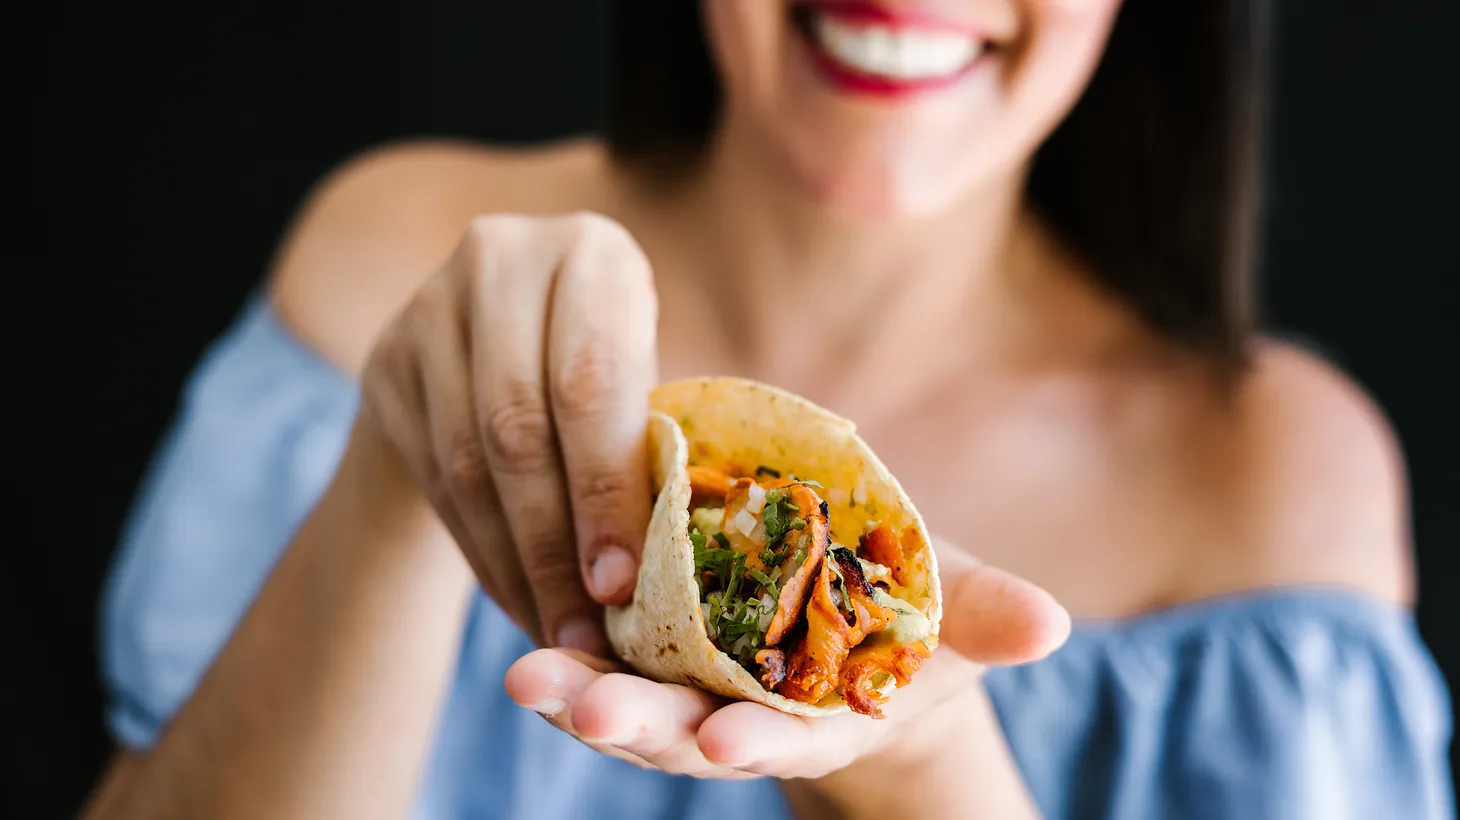 This stock image lady would love for you to eat her tortilla and whatever is in it. But we have tastier options for you, thanks to the 2023 Tortilla Tournament.